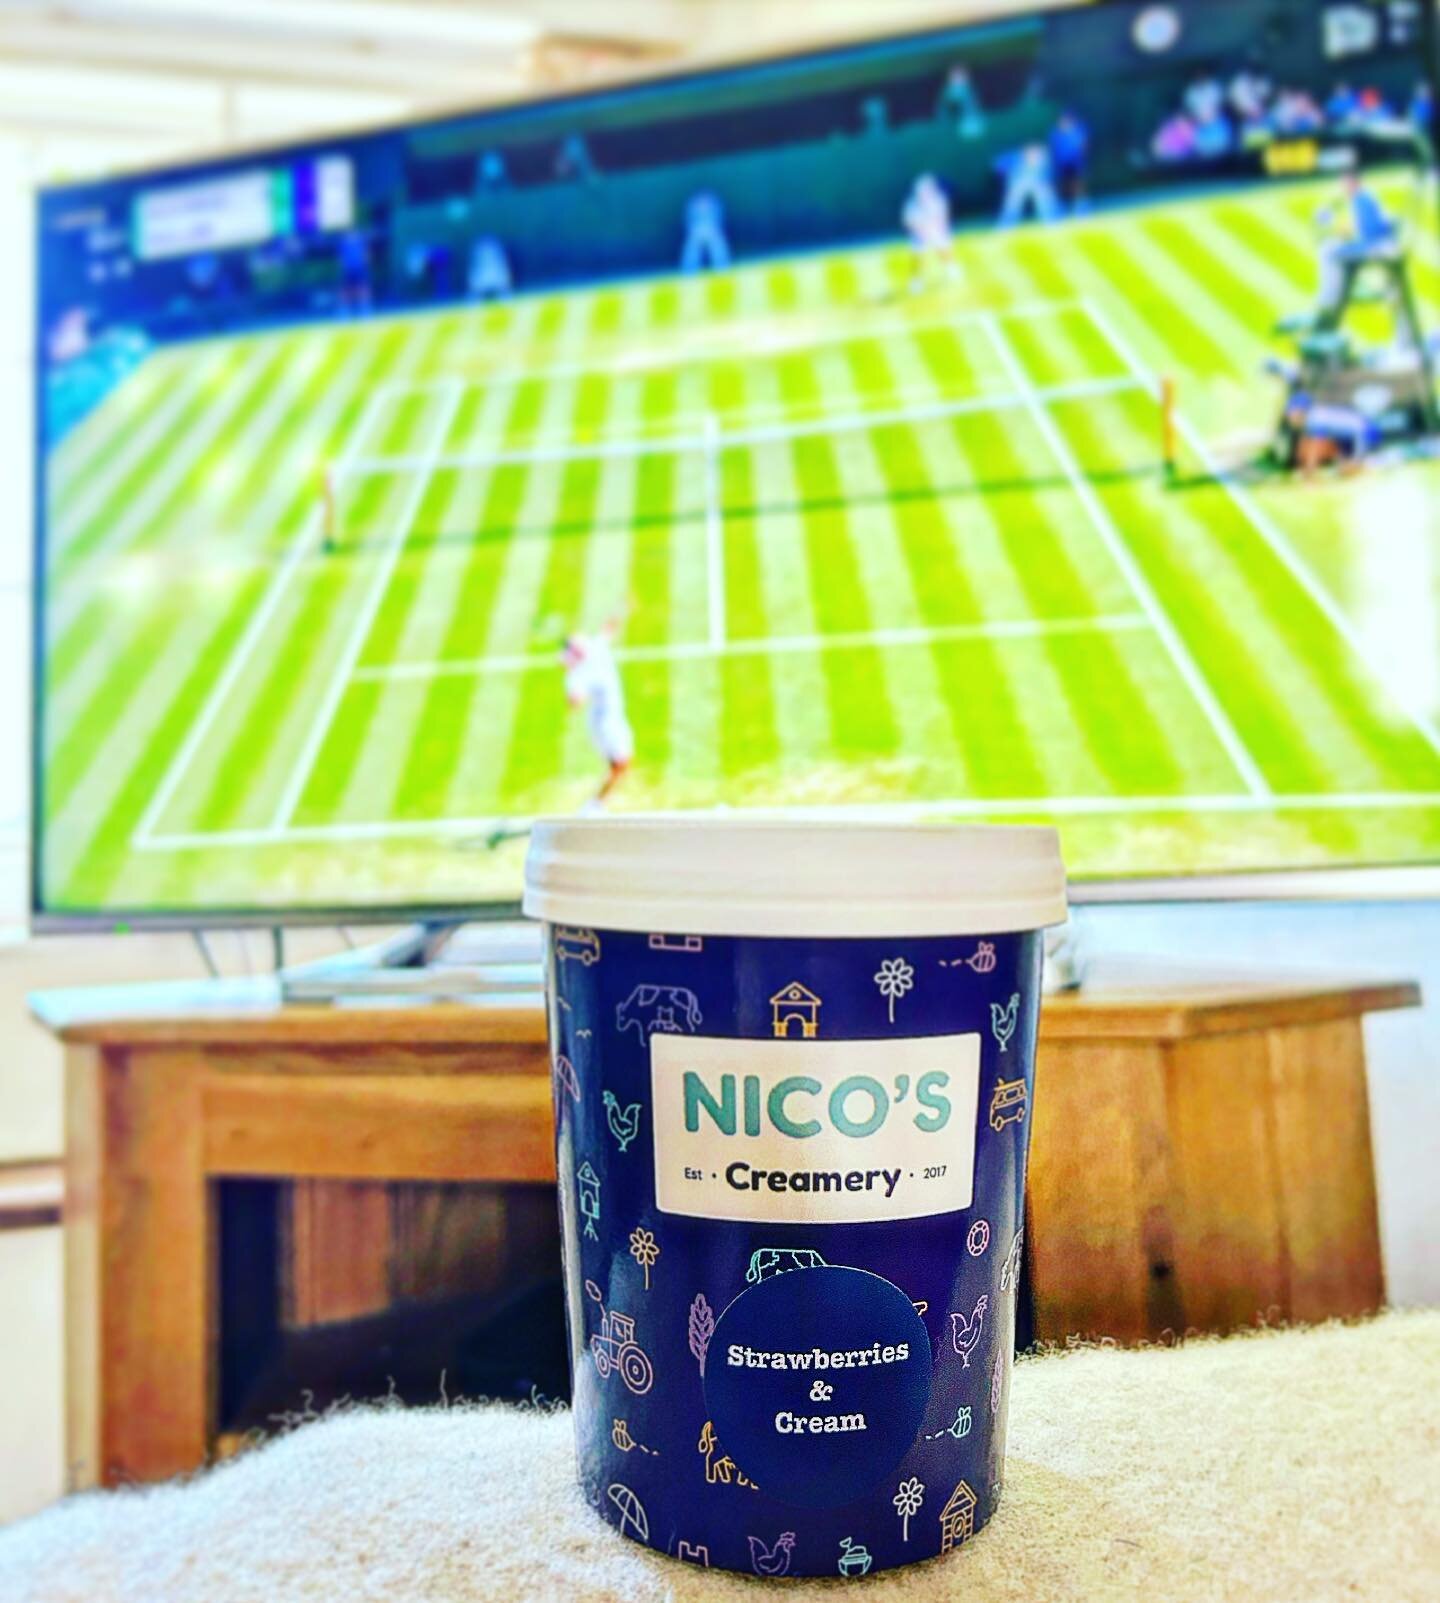 The next best thing to actually being at @wimbledon 😋🎾